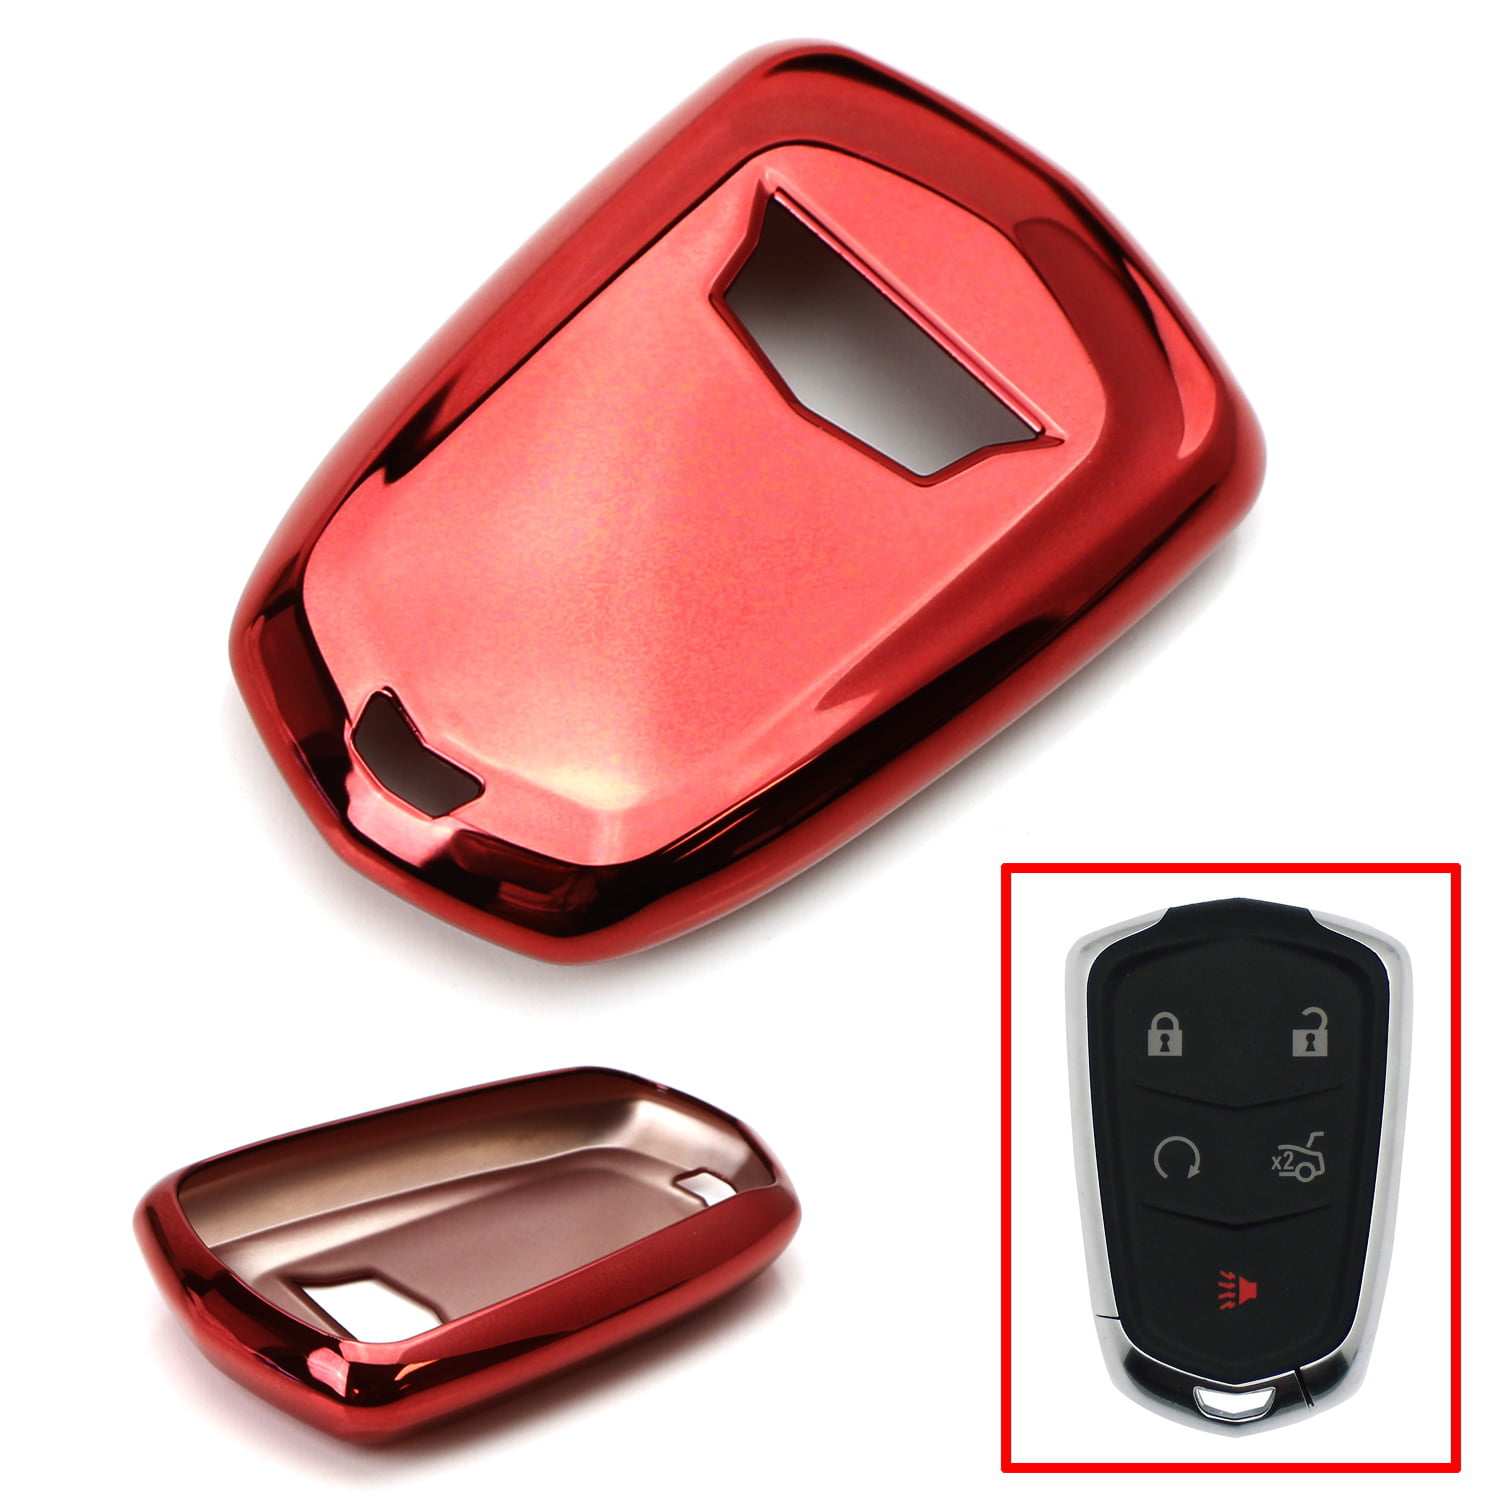 Exact Size Glossy Red Smart Key Fob Shell For Cadillac ATS CTS XTS Escalade Red 